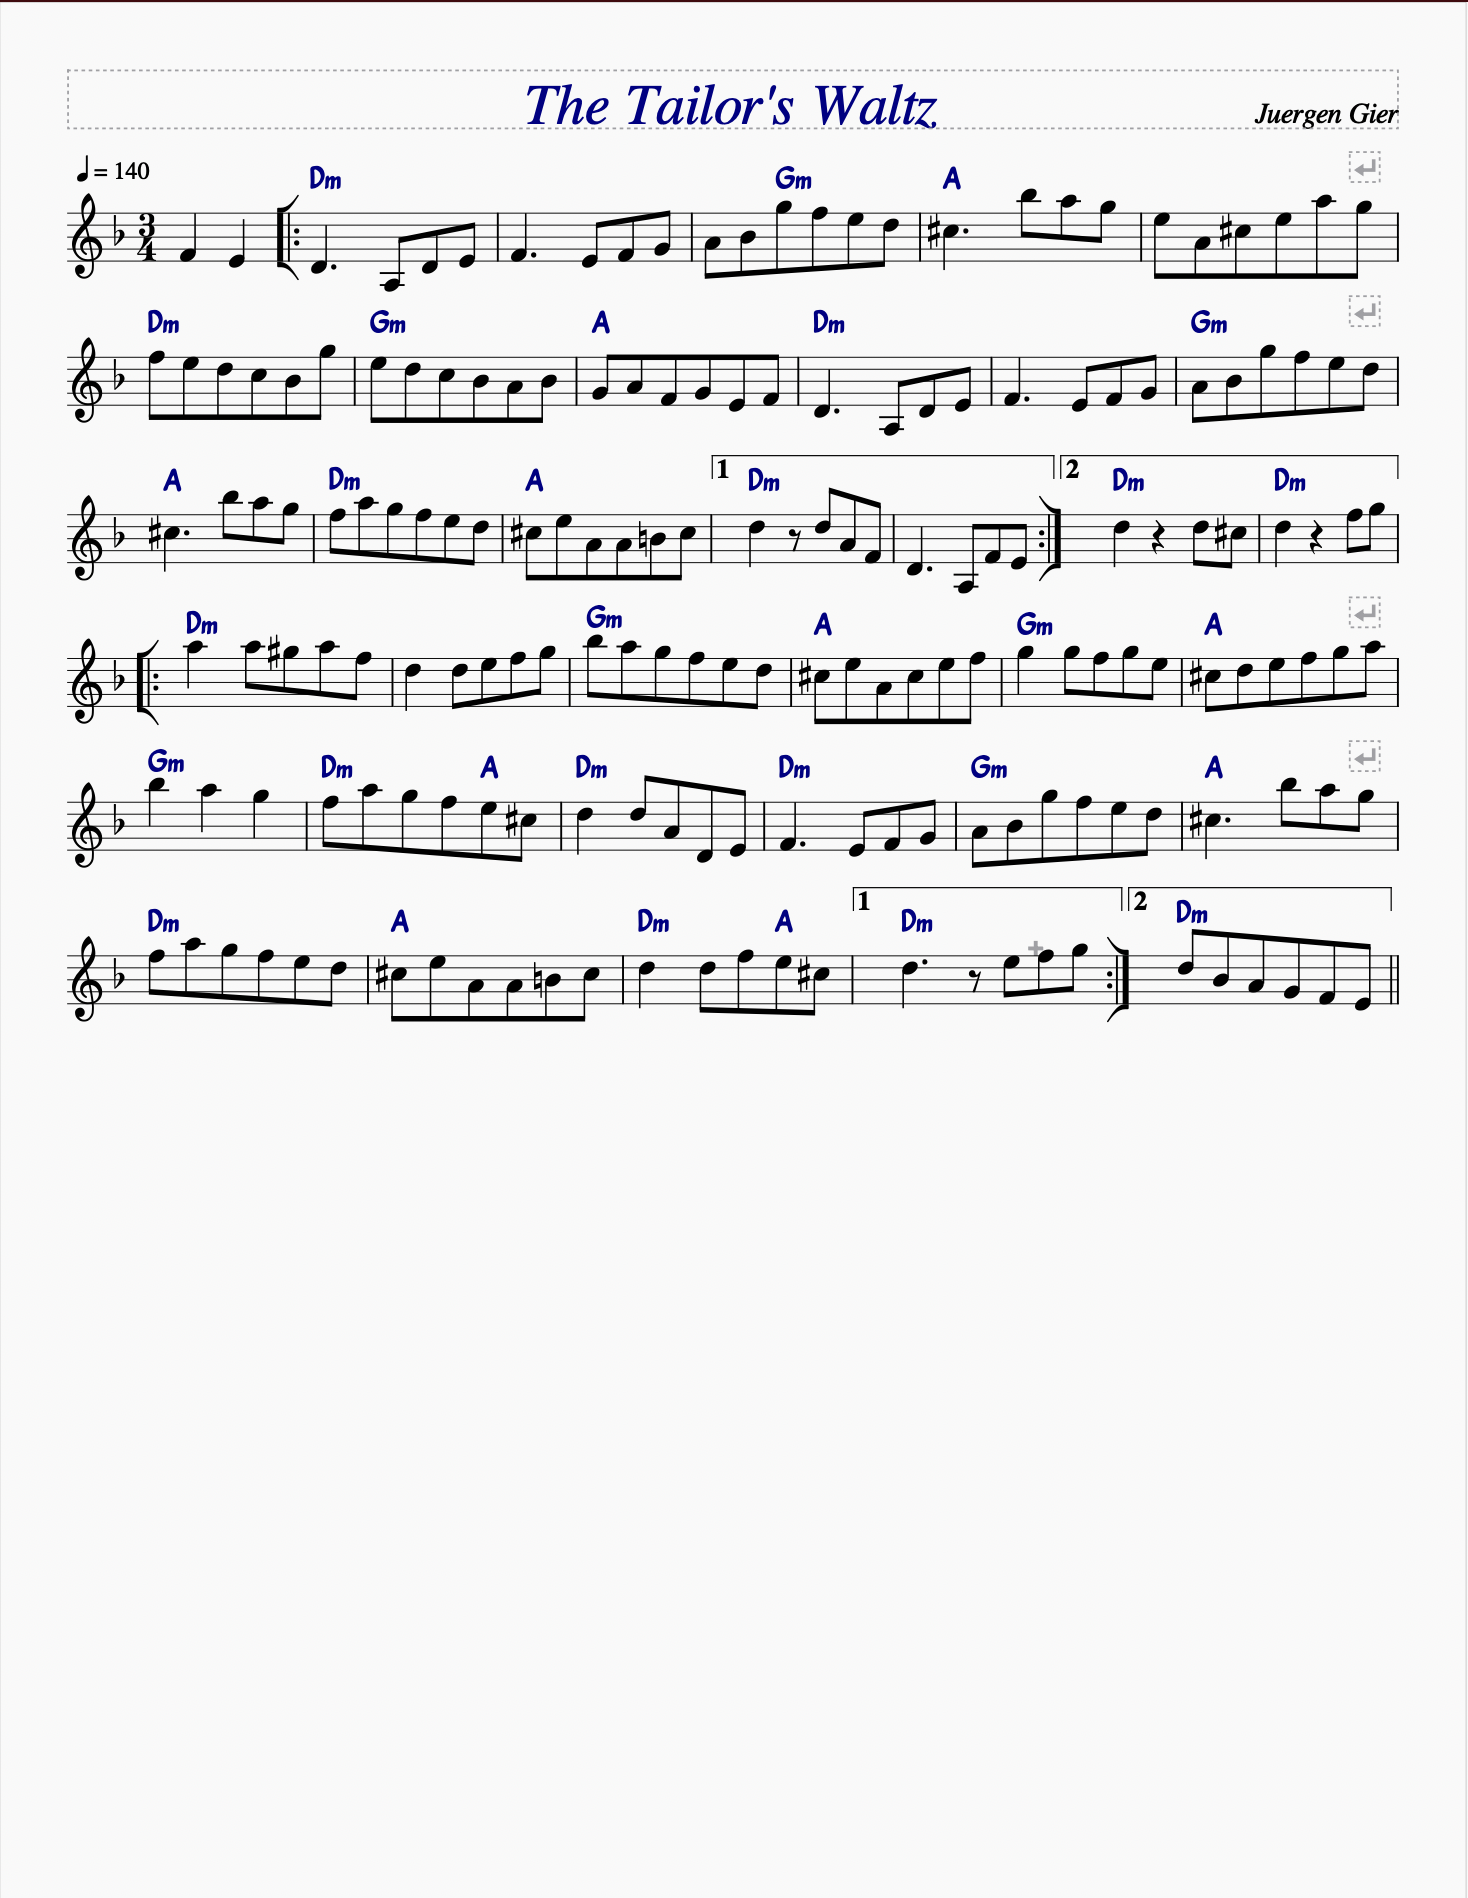 Vertical Spacing In 36 Is A Problem Musescore 6902